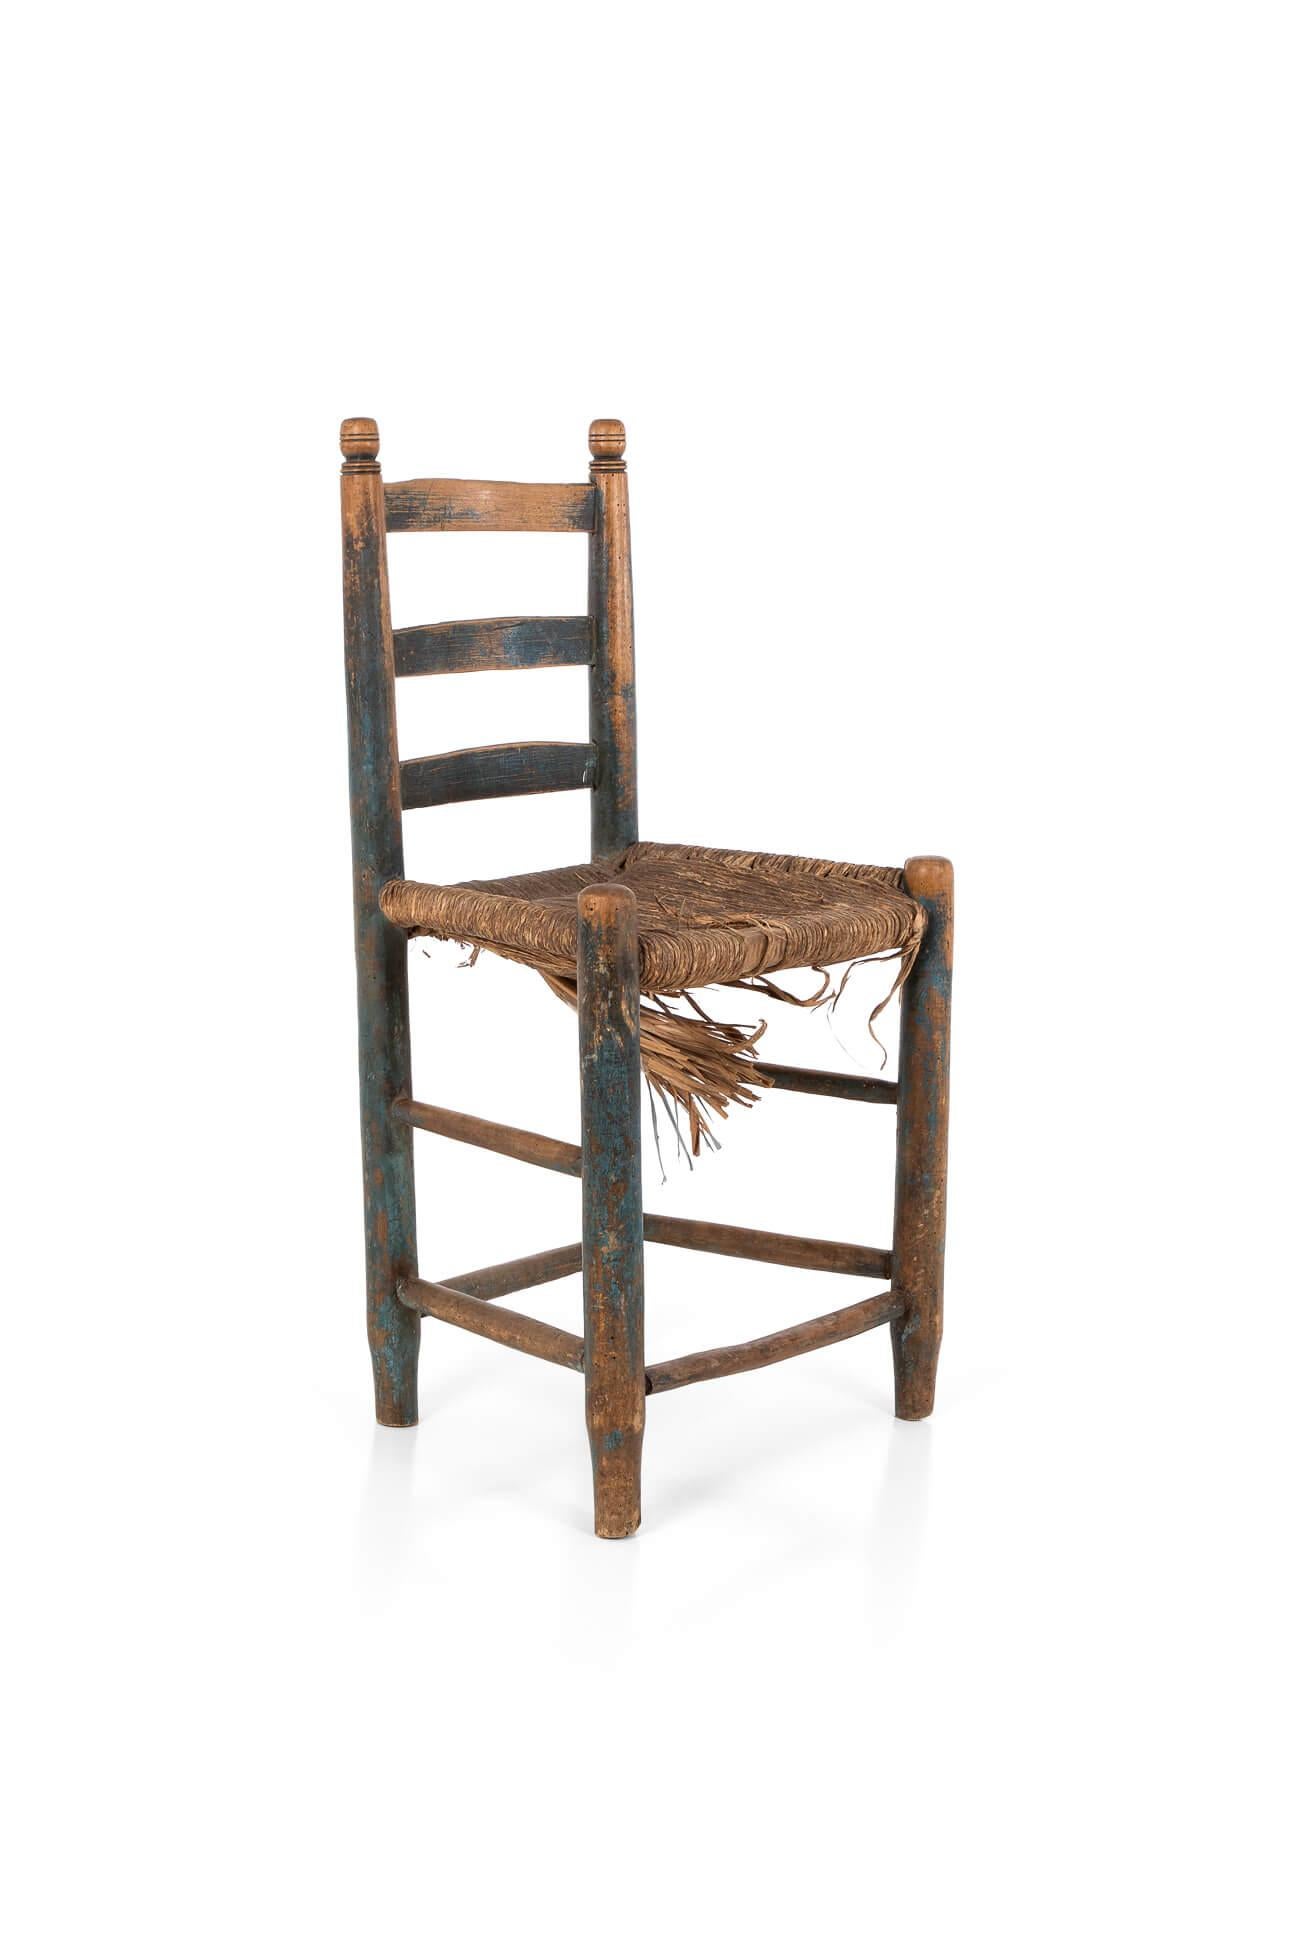 A diminutive rush seat side chair with a ladder back.

Featuring traces of the original blue paint to the legs.

English, circa 1890.

TOTAL

H: 84 CM  H: 33 INCHES

W: 45 CM  W: 17.7 INCHES

D: 34 CM  D: 13.3 INCHES

SEAT HEIGHT

H: 46 CM  H: 18.1